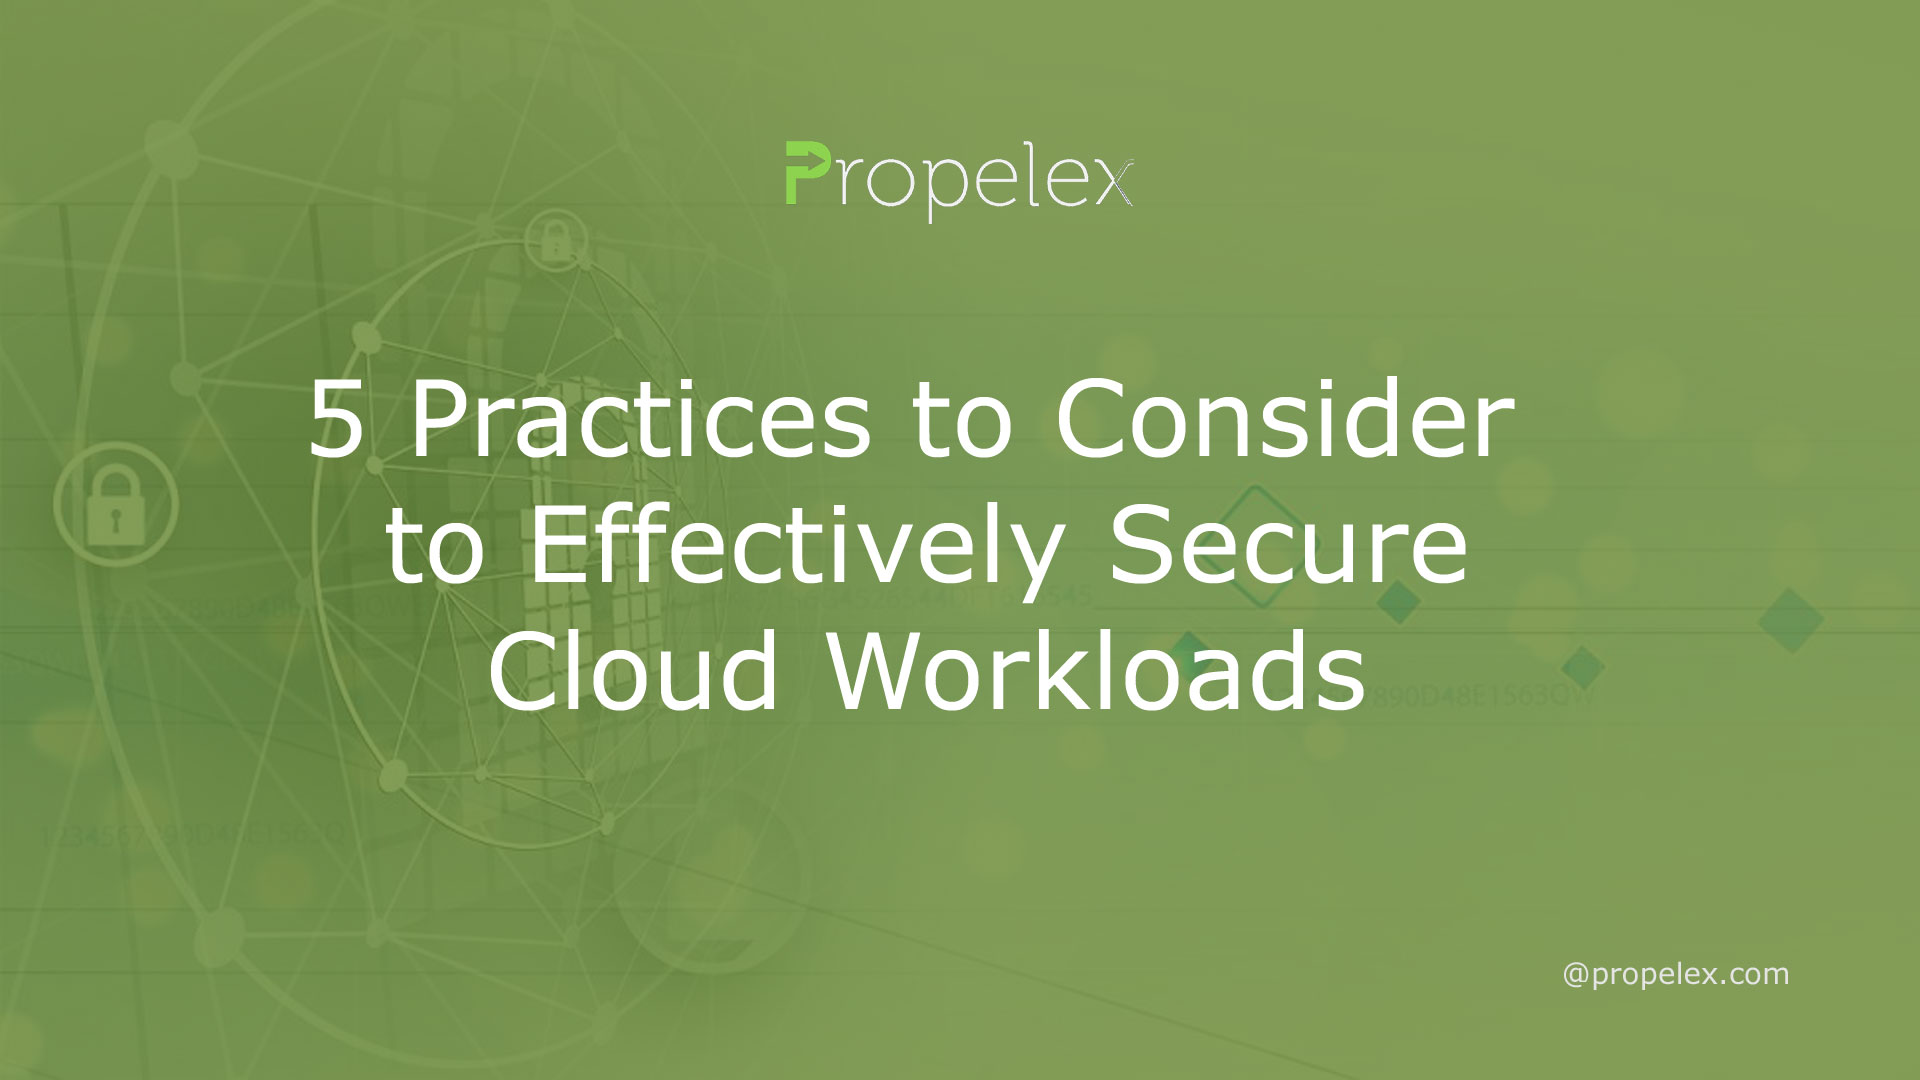 5 Practices to Consider to Effectively Secure Cloud Workloads